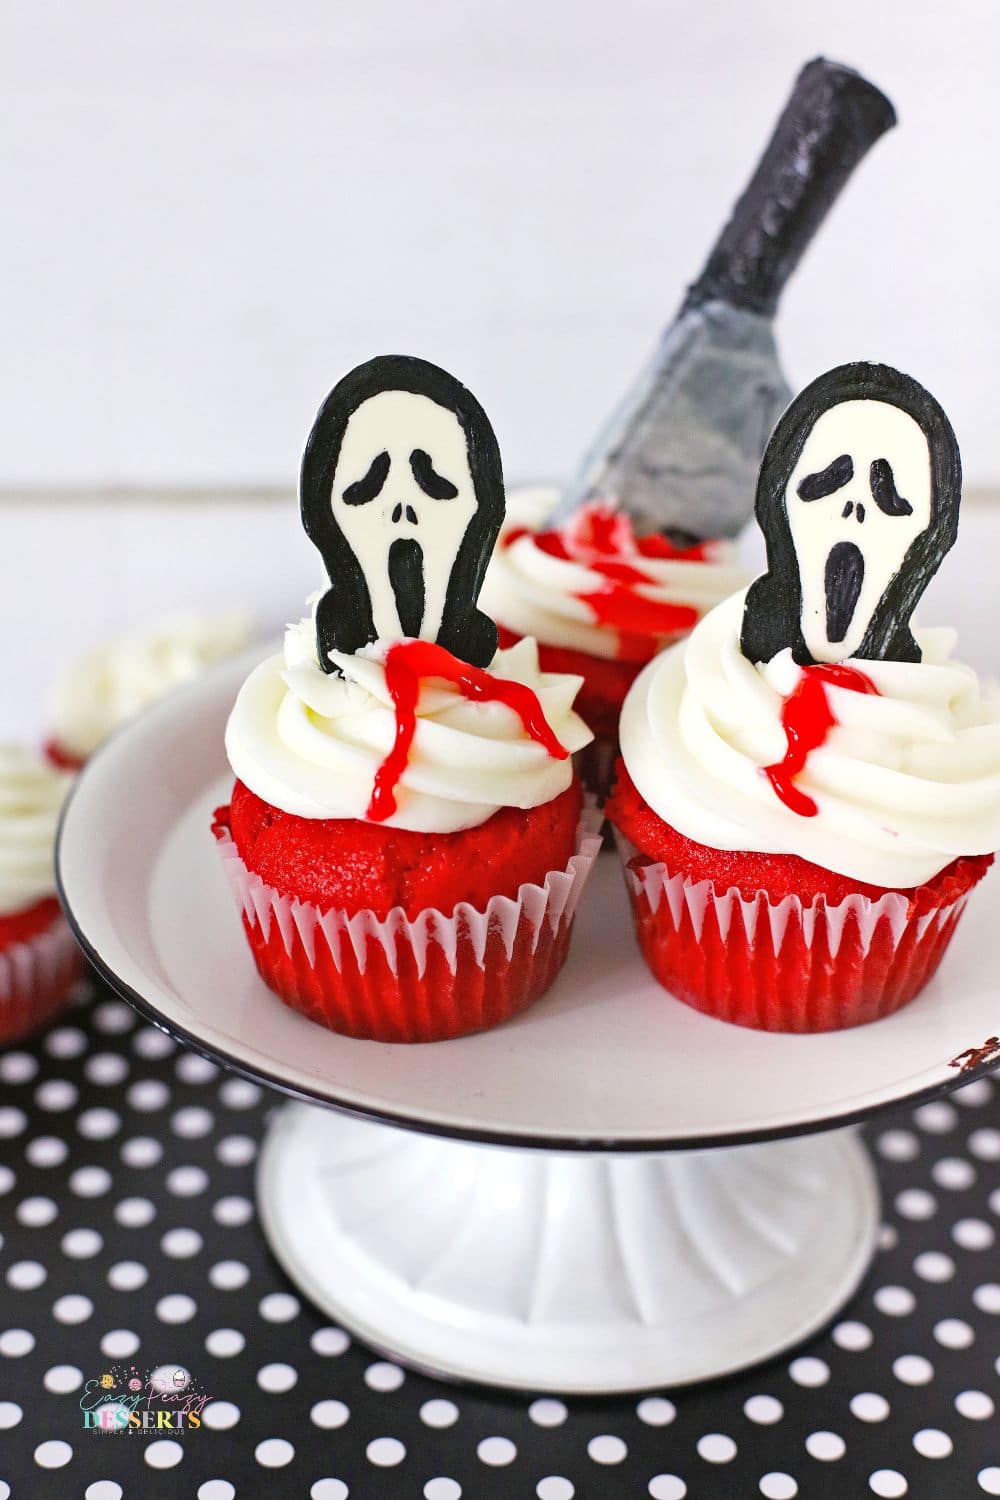 Scary Halloween cupcakes with scream faces and knifes